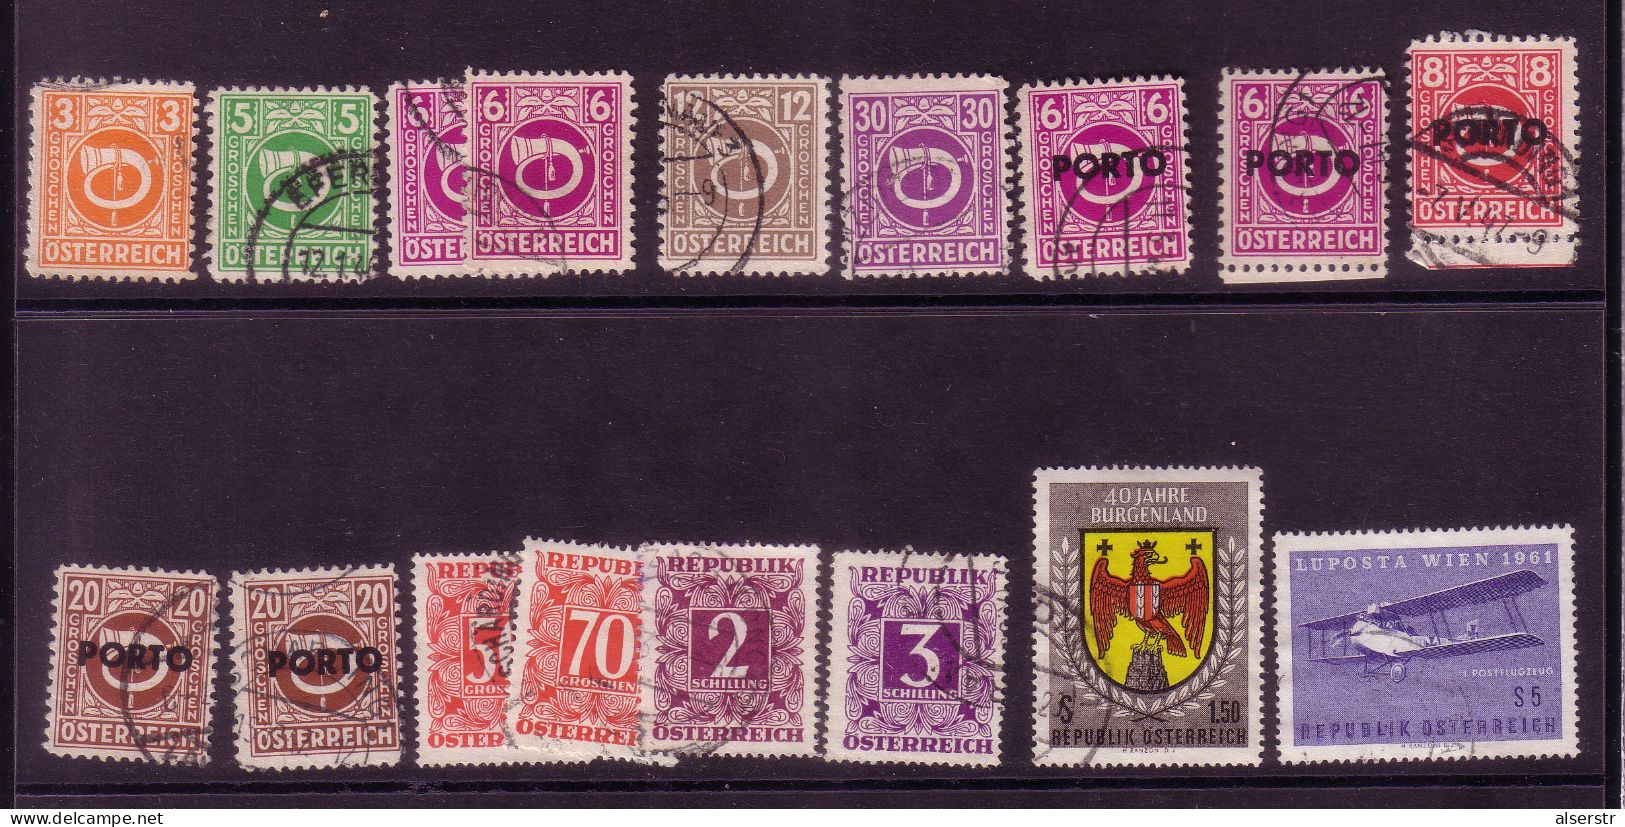 Austria 2nd Republic Lot MNH, Used - Lots & Kiloware (mixtures) - Max. 999 Stamps